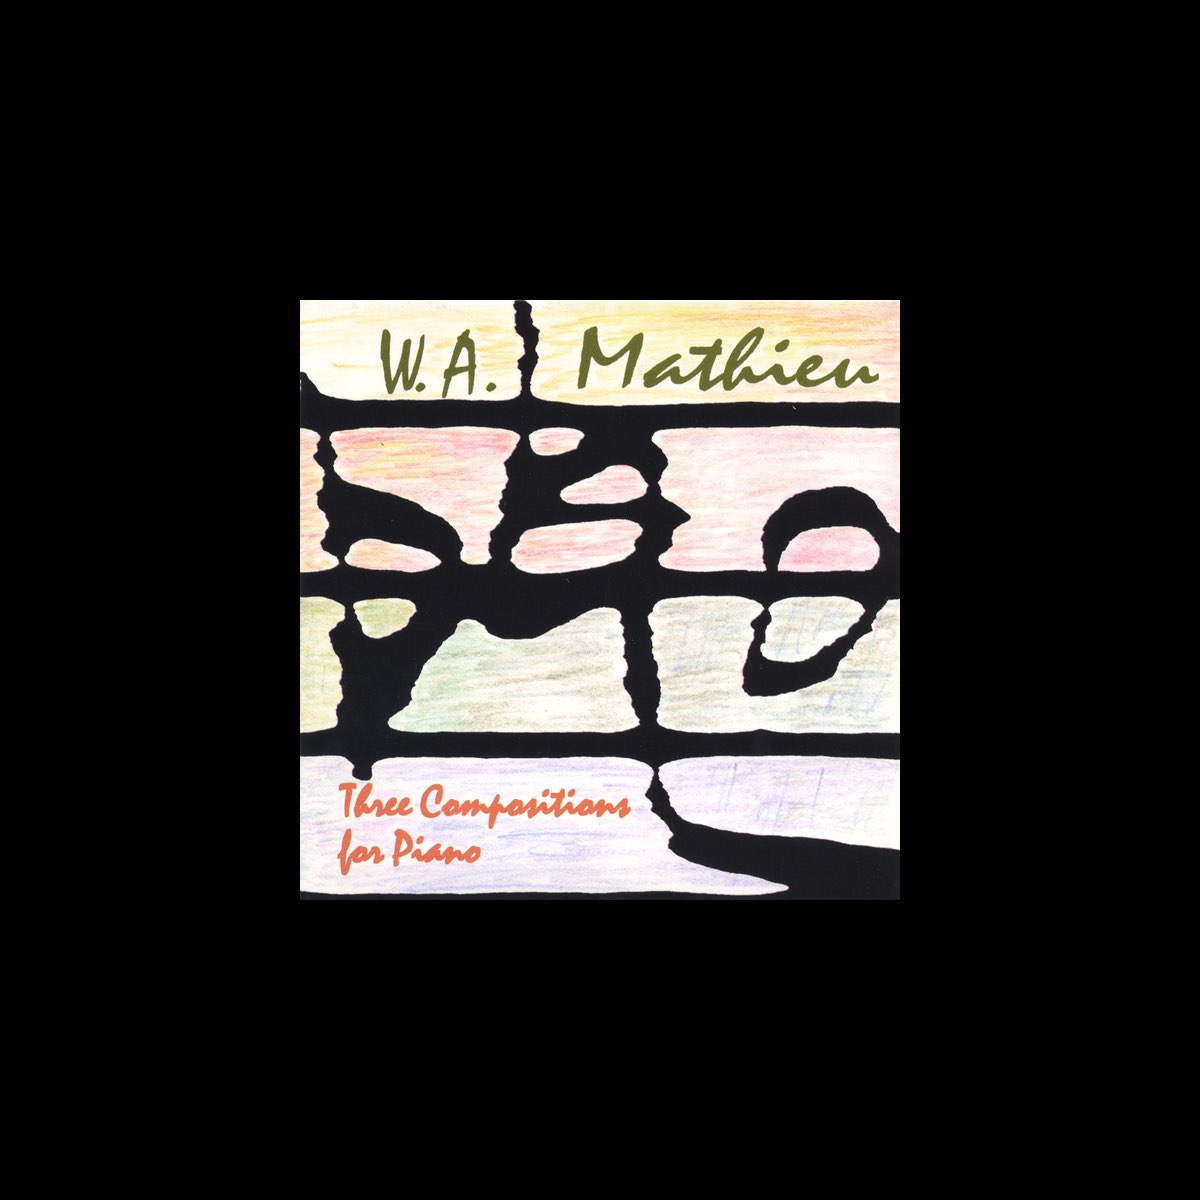 Three Compositions for Piano by W. A. Mathieu on Apple Music